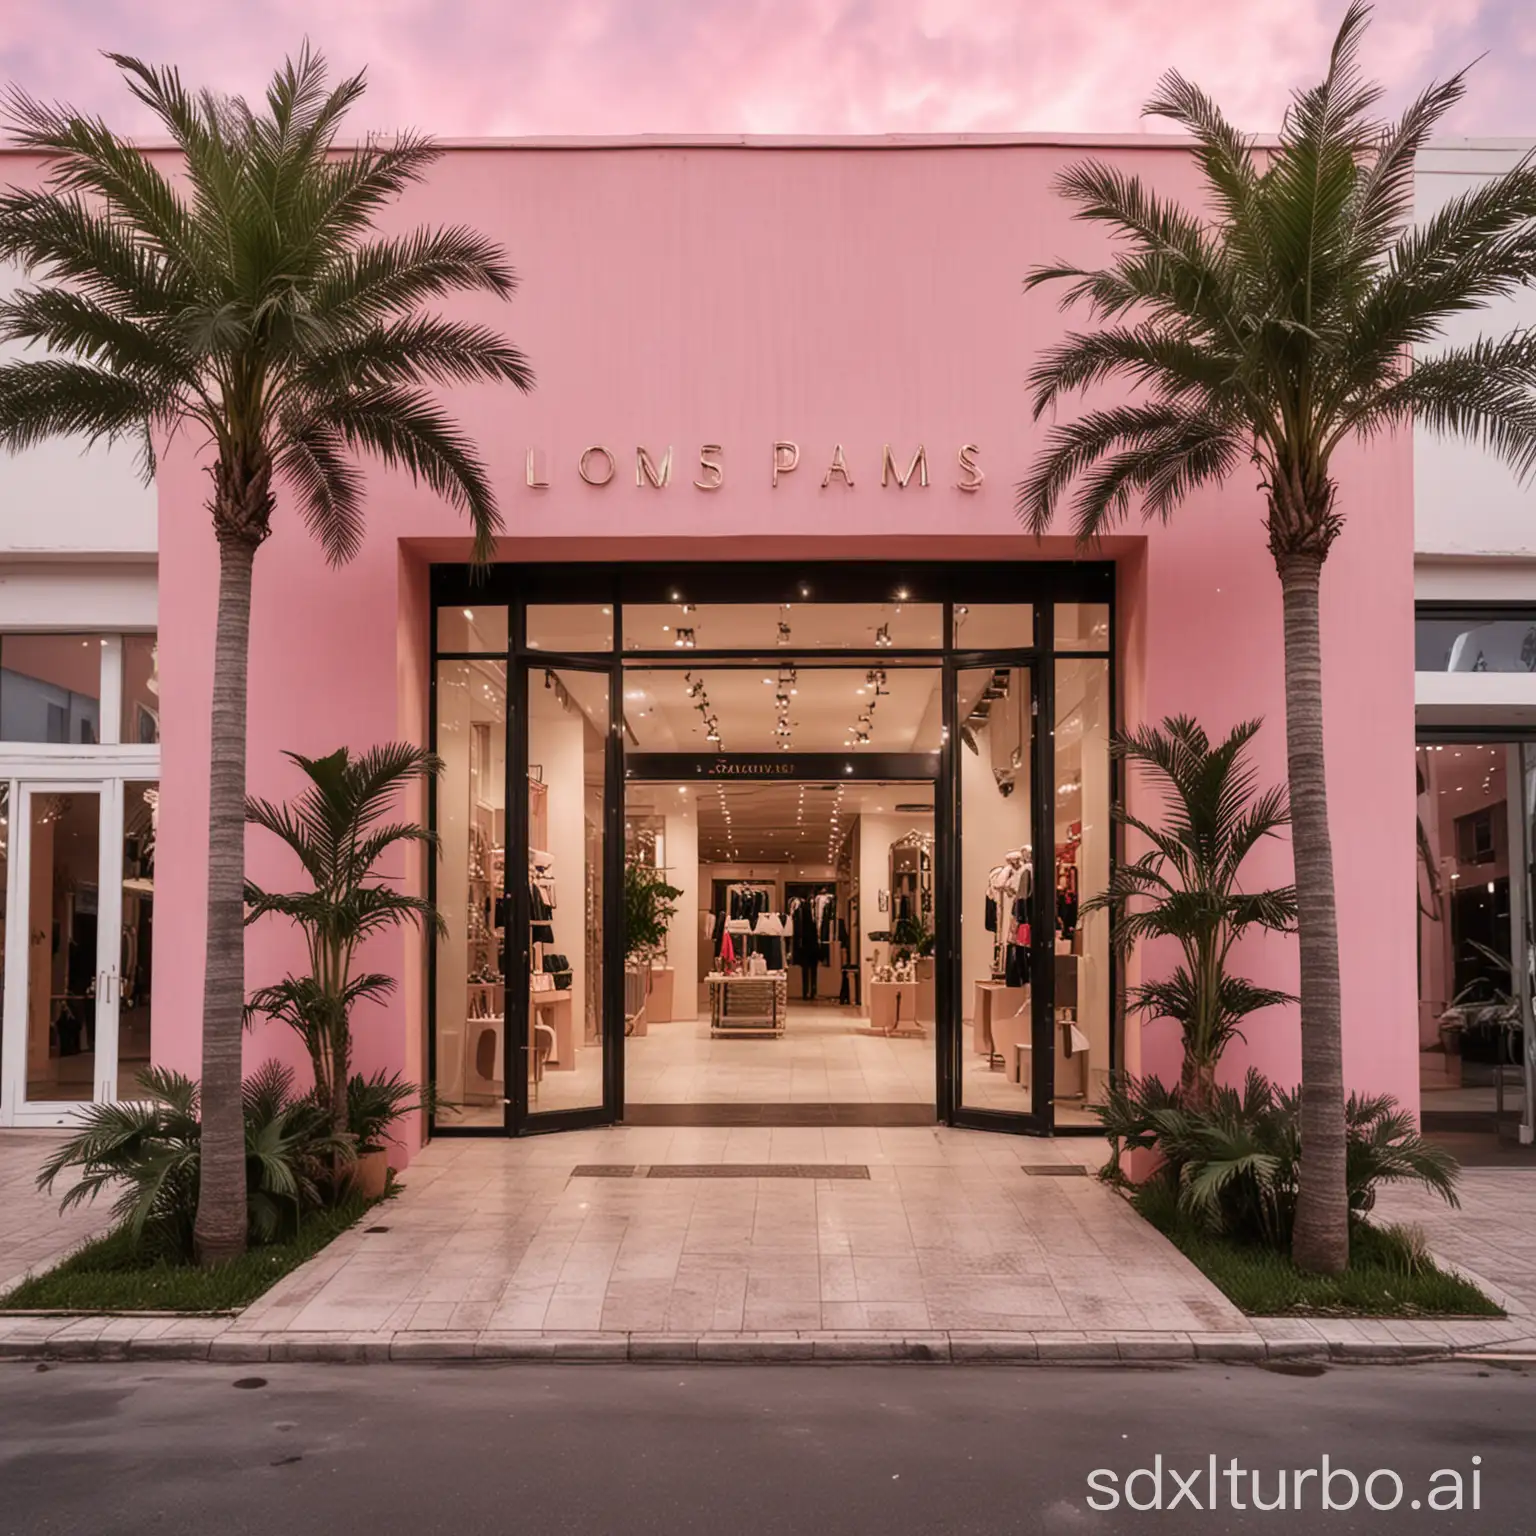 outdoor entrance of the modern high fashion  designer handbags and shoes boutique. Modern building in classic style, with pink sky and tall palms outdoors